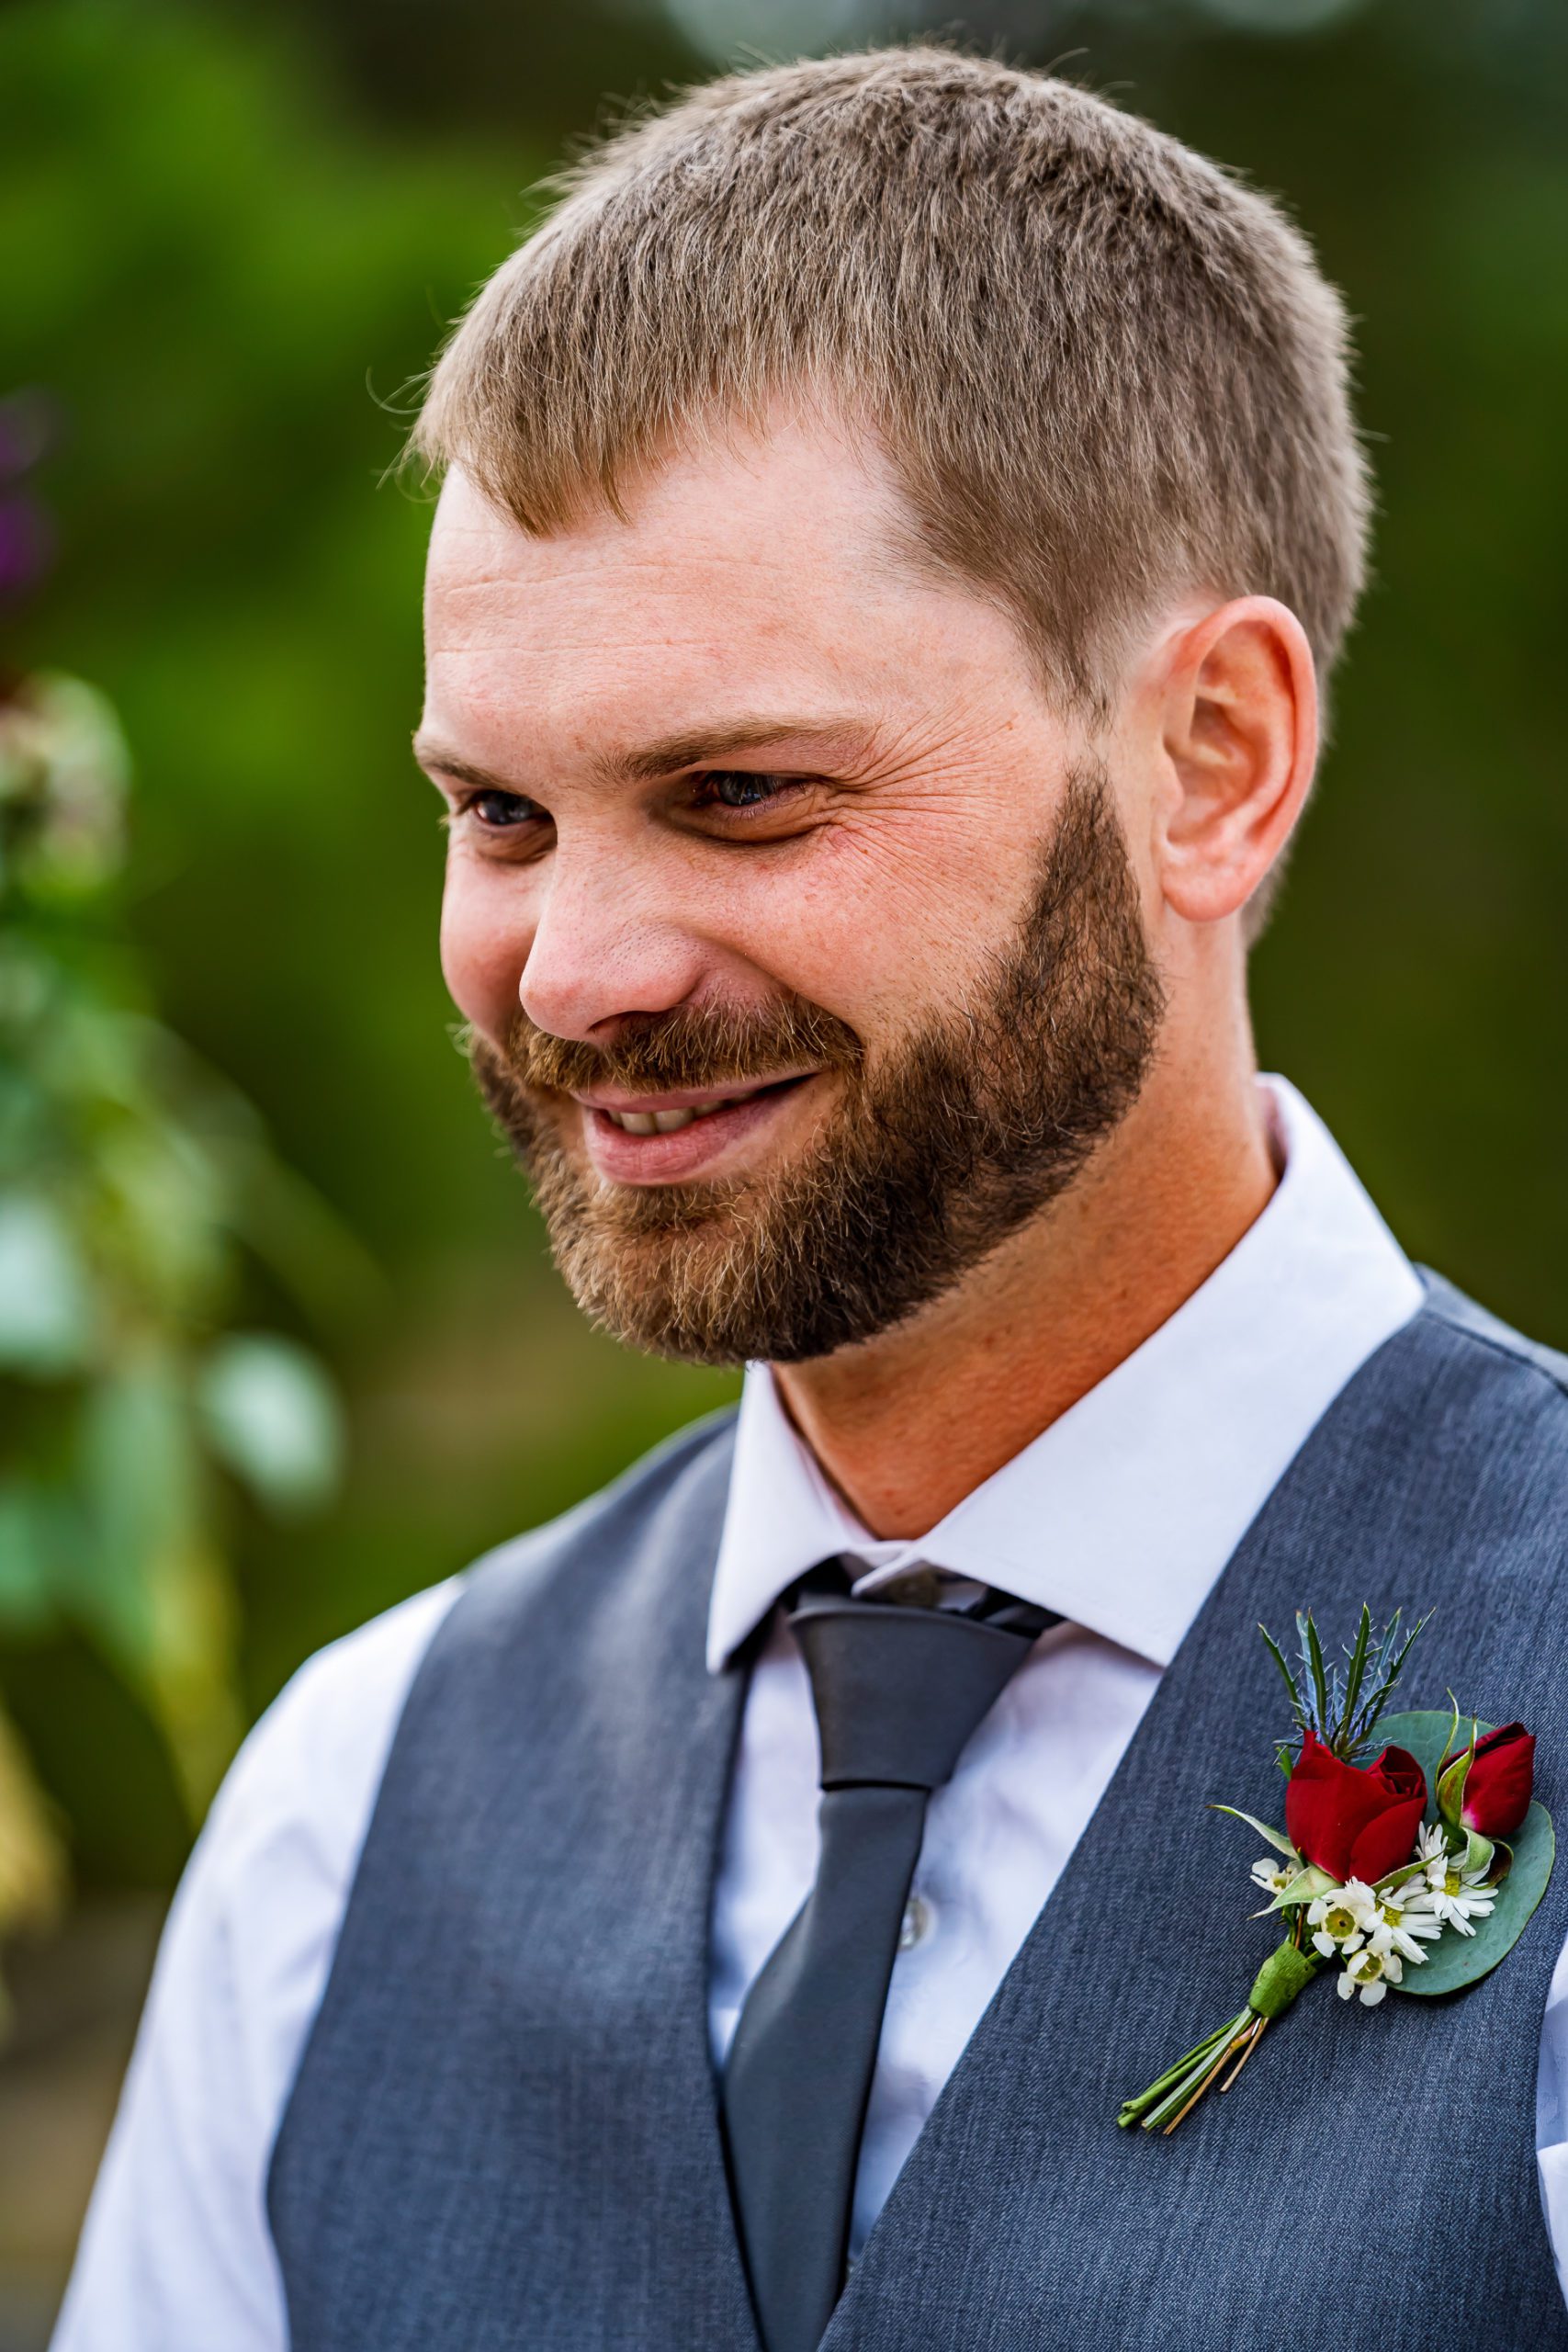 A groom with a grey vest and red roses in his boutonniere.